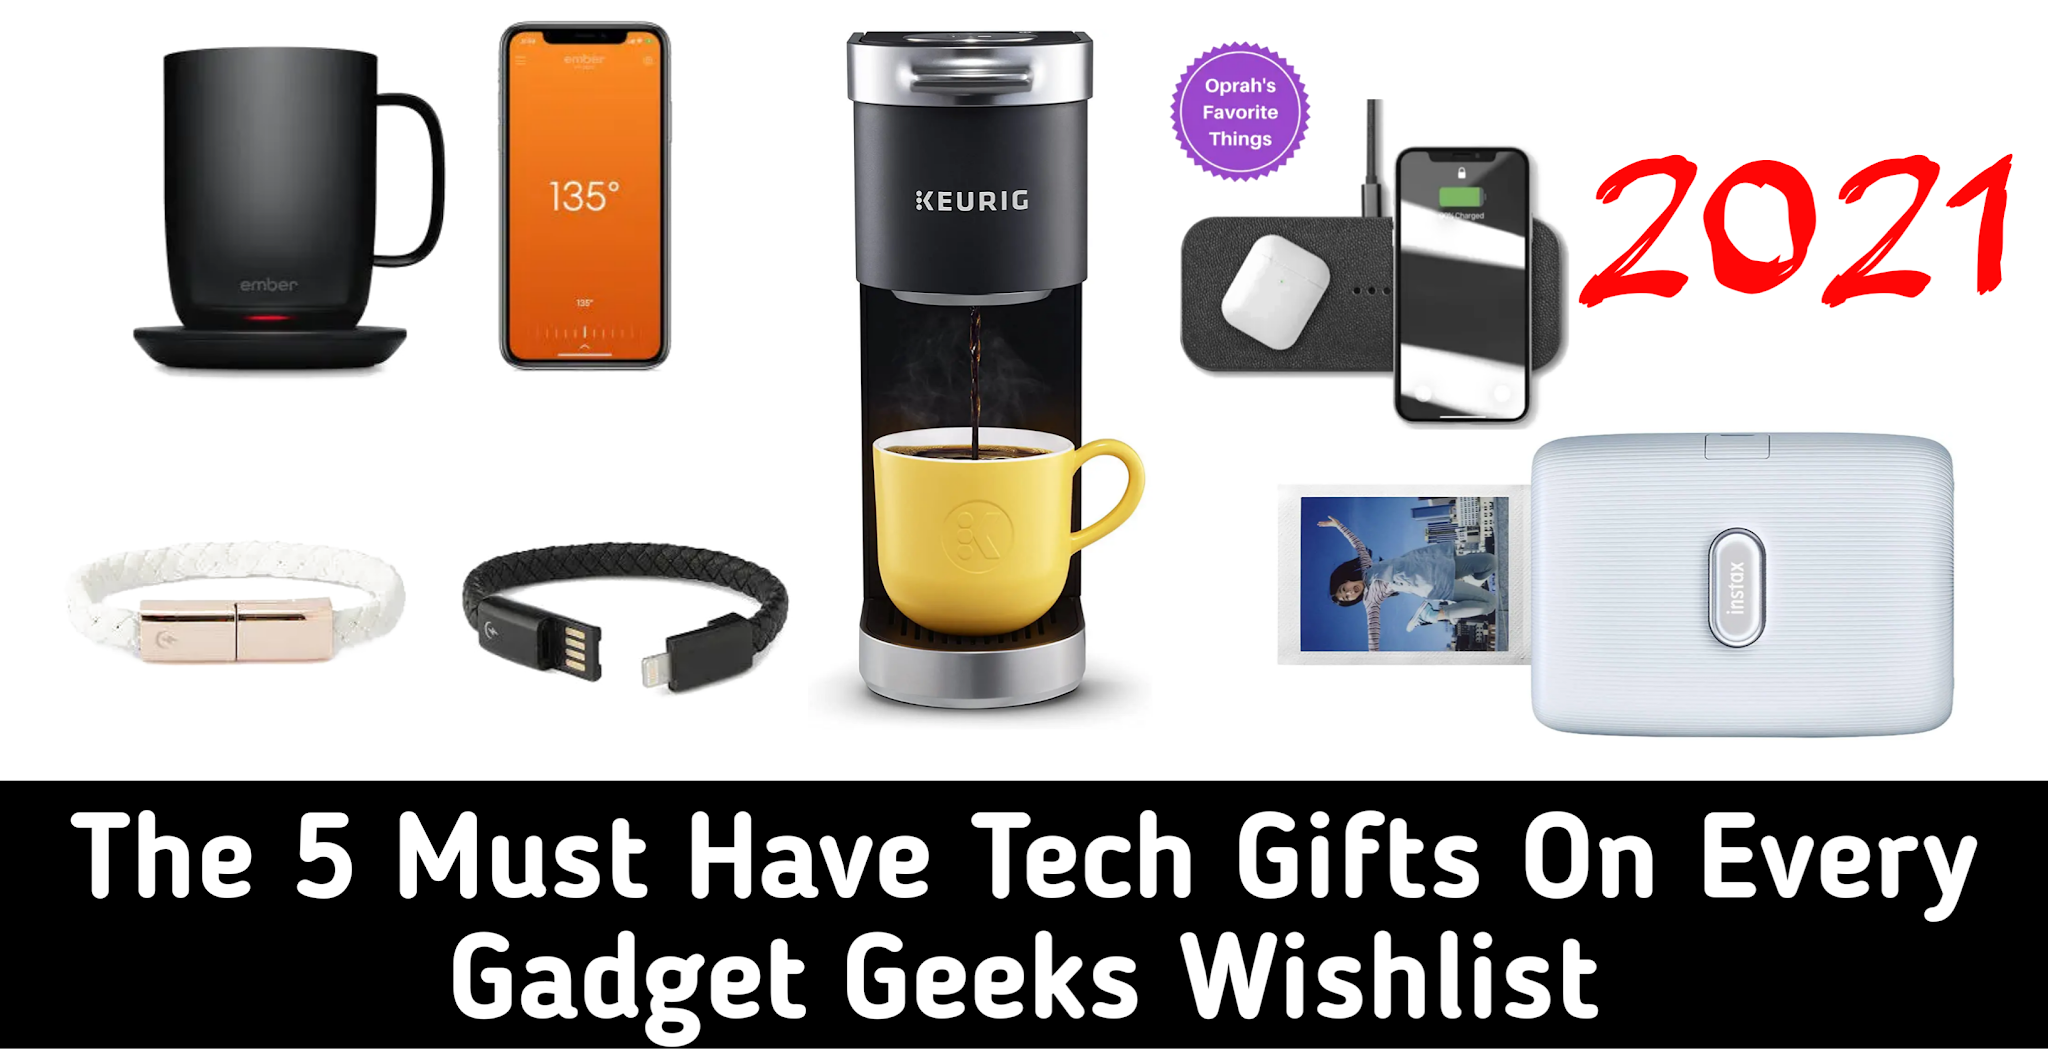 The 5 Must Have Tech Gifts On Every Gadget Geeks Wishlist | Tech Robin